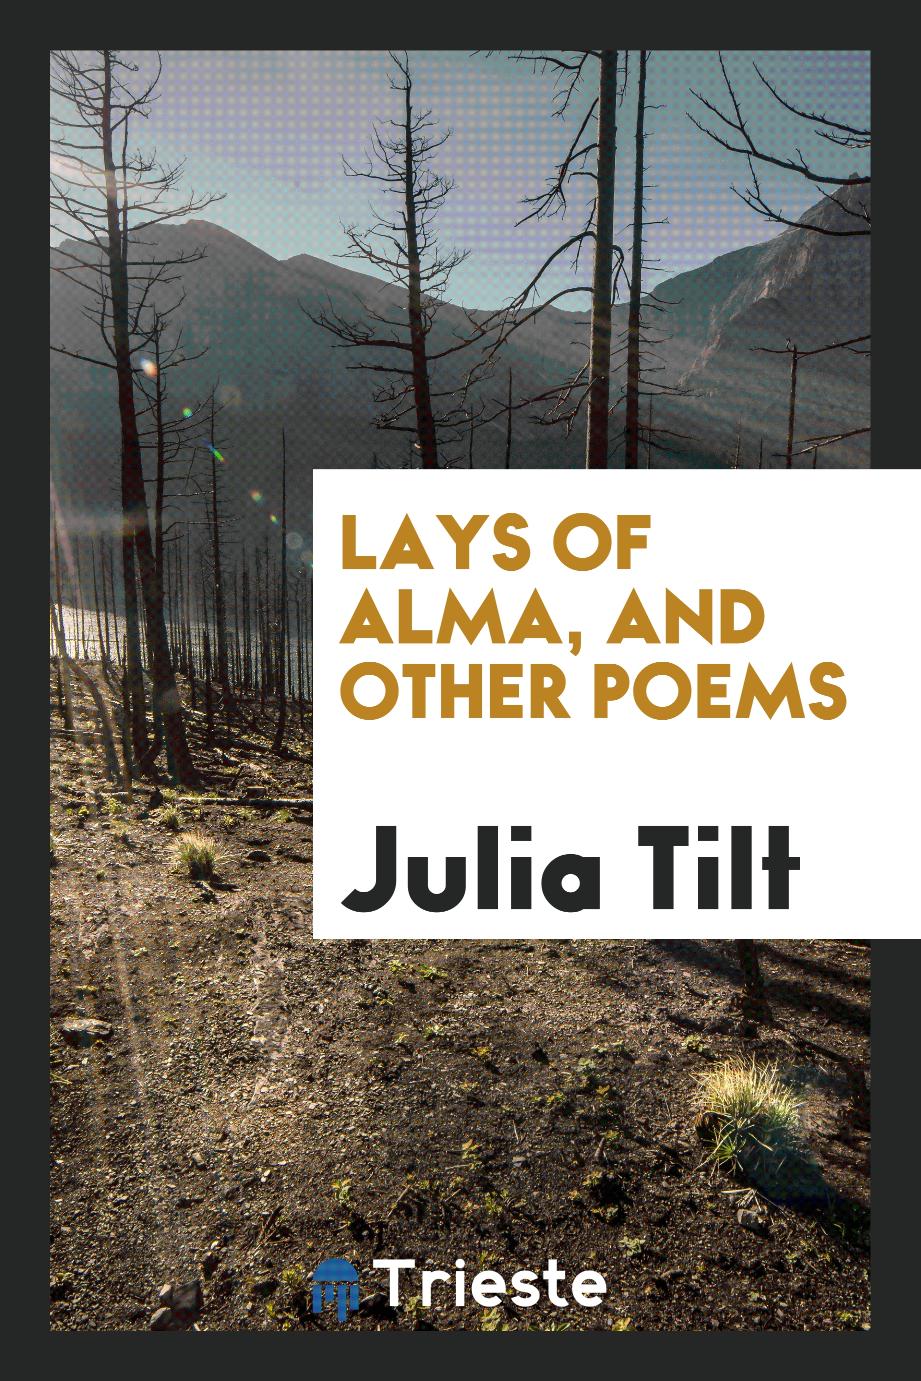 Lays of Alma, and other poems